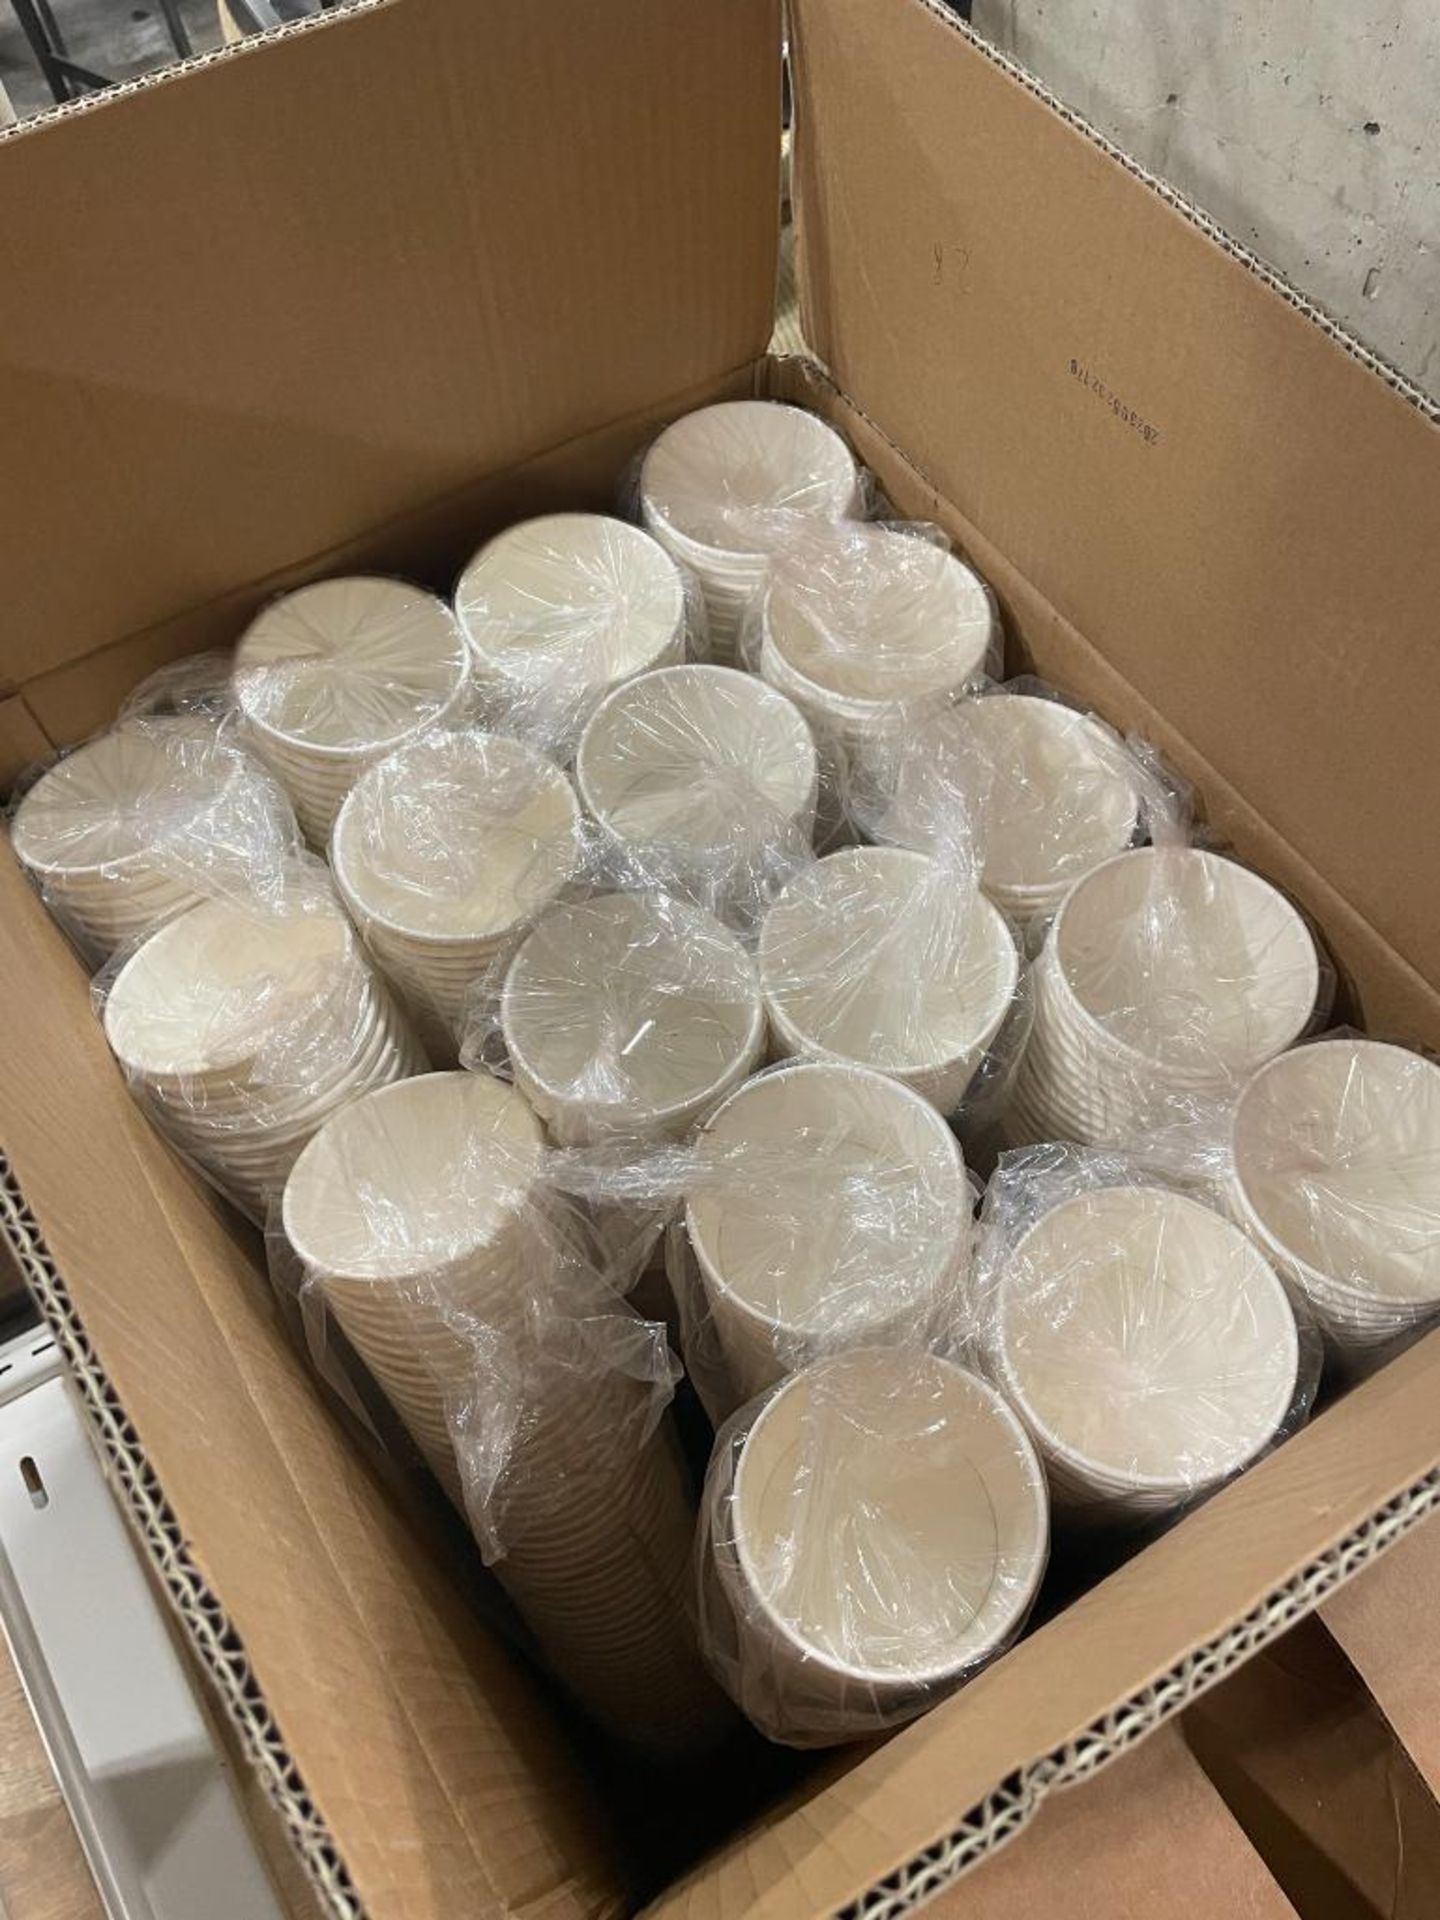 LOT OF HOT FOOD TAKE OUT CONTAINERS, PAPER STRAWS, HOT DOG TAKEOUT BOXES & 2OZ PORTION CUPS - Image 11 of 15